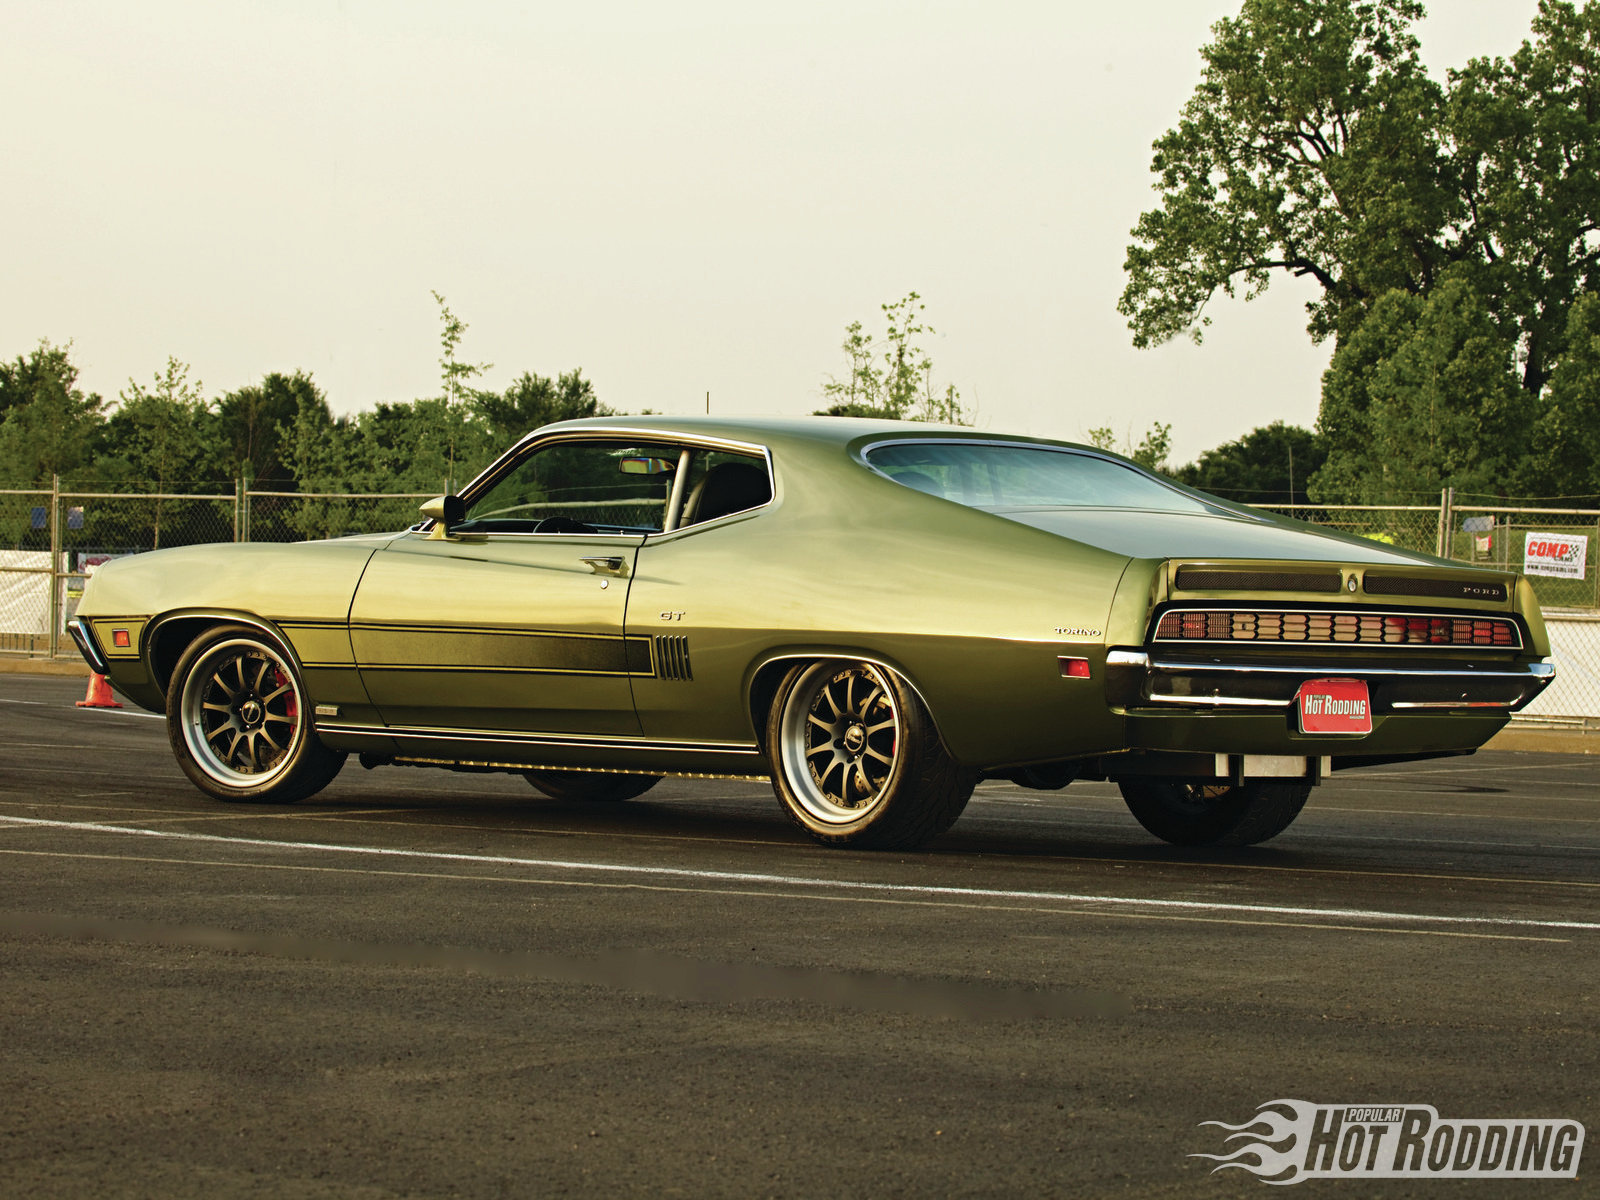 Amazing 1970 Ford Torino Pictures & Backgrounds